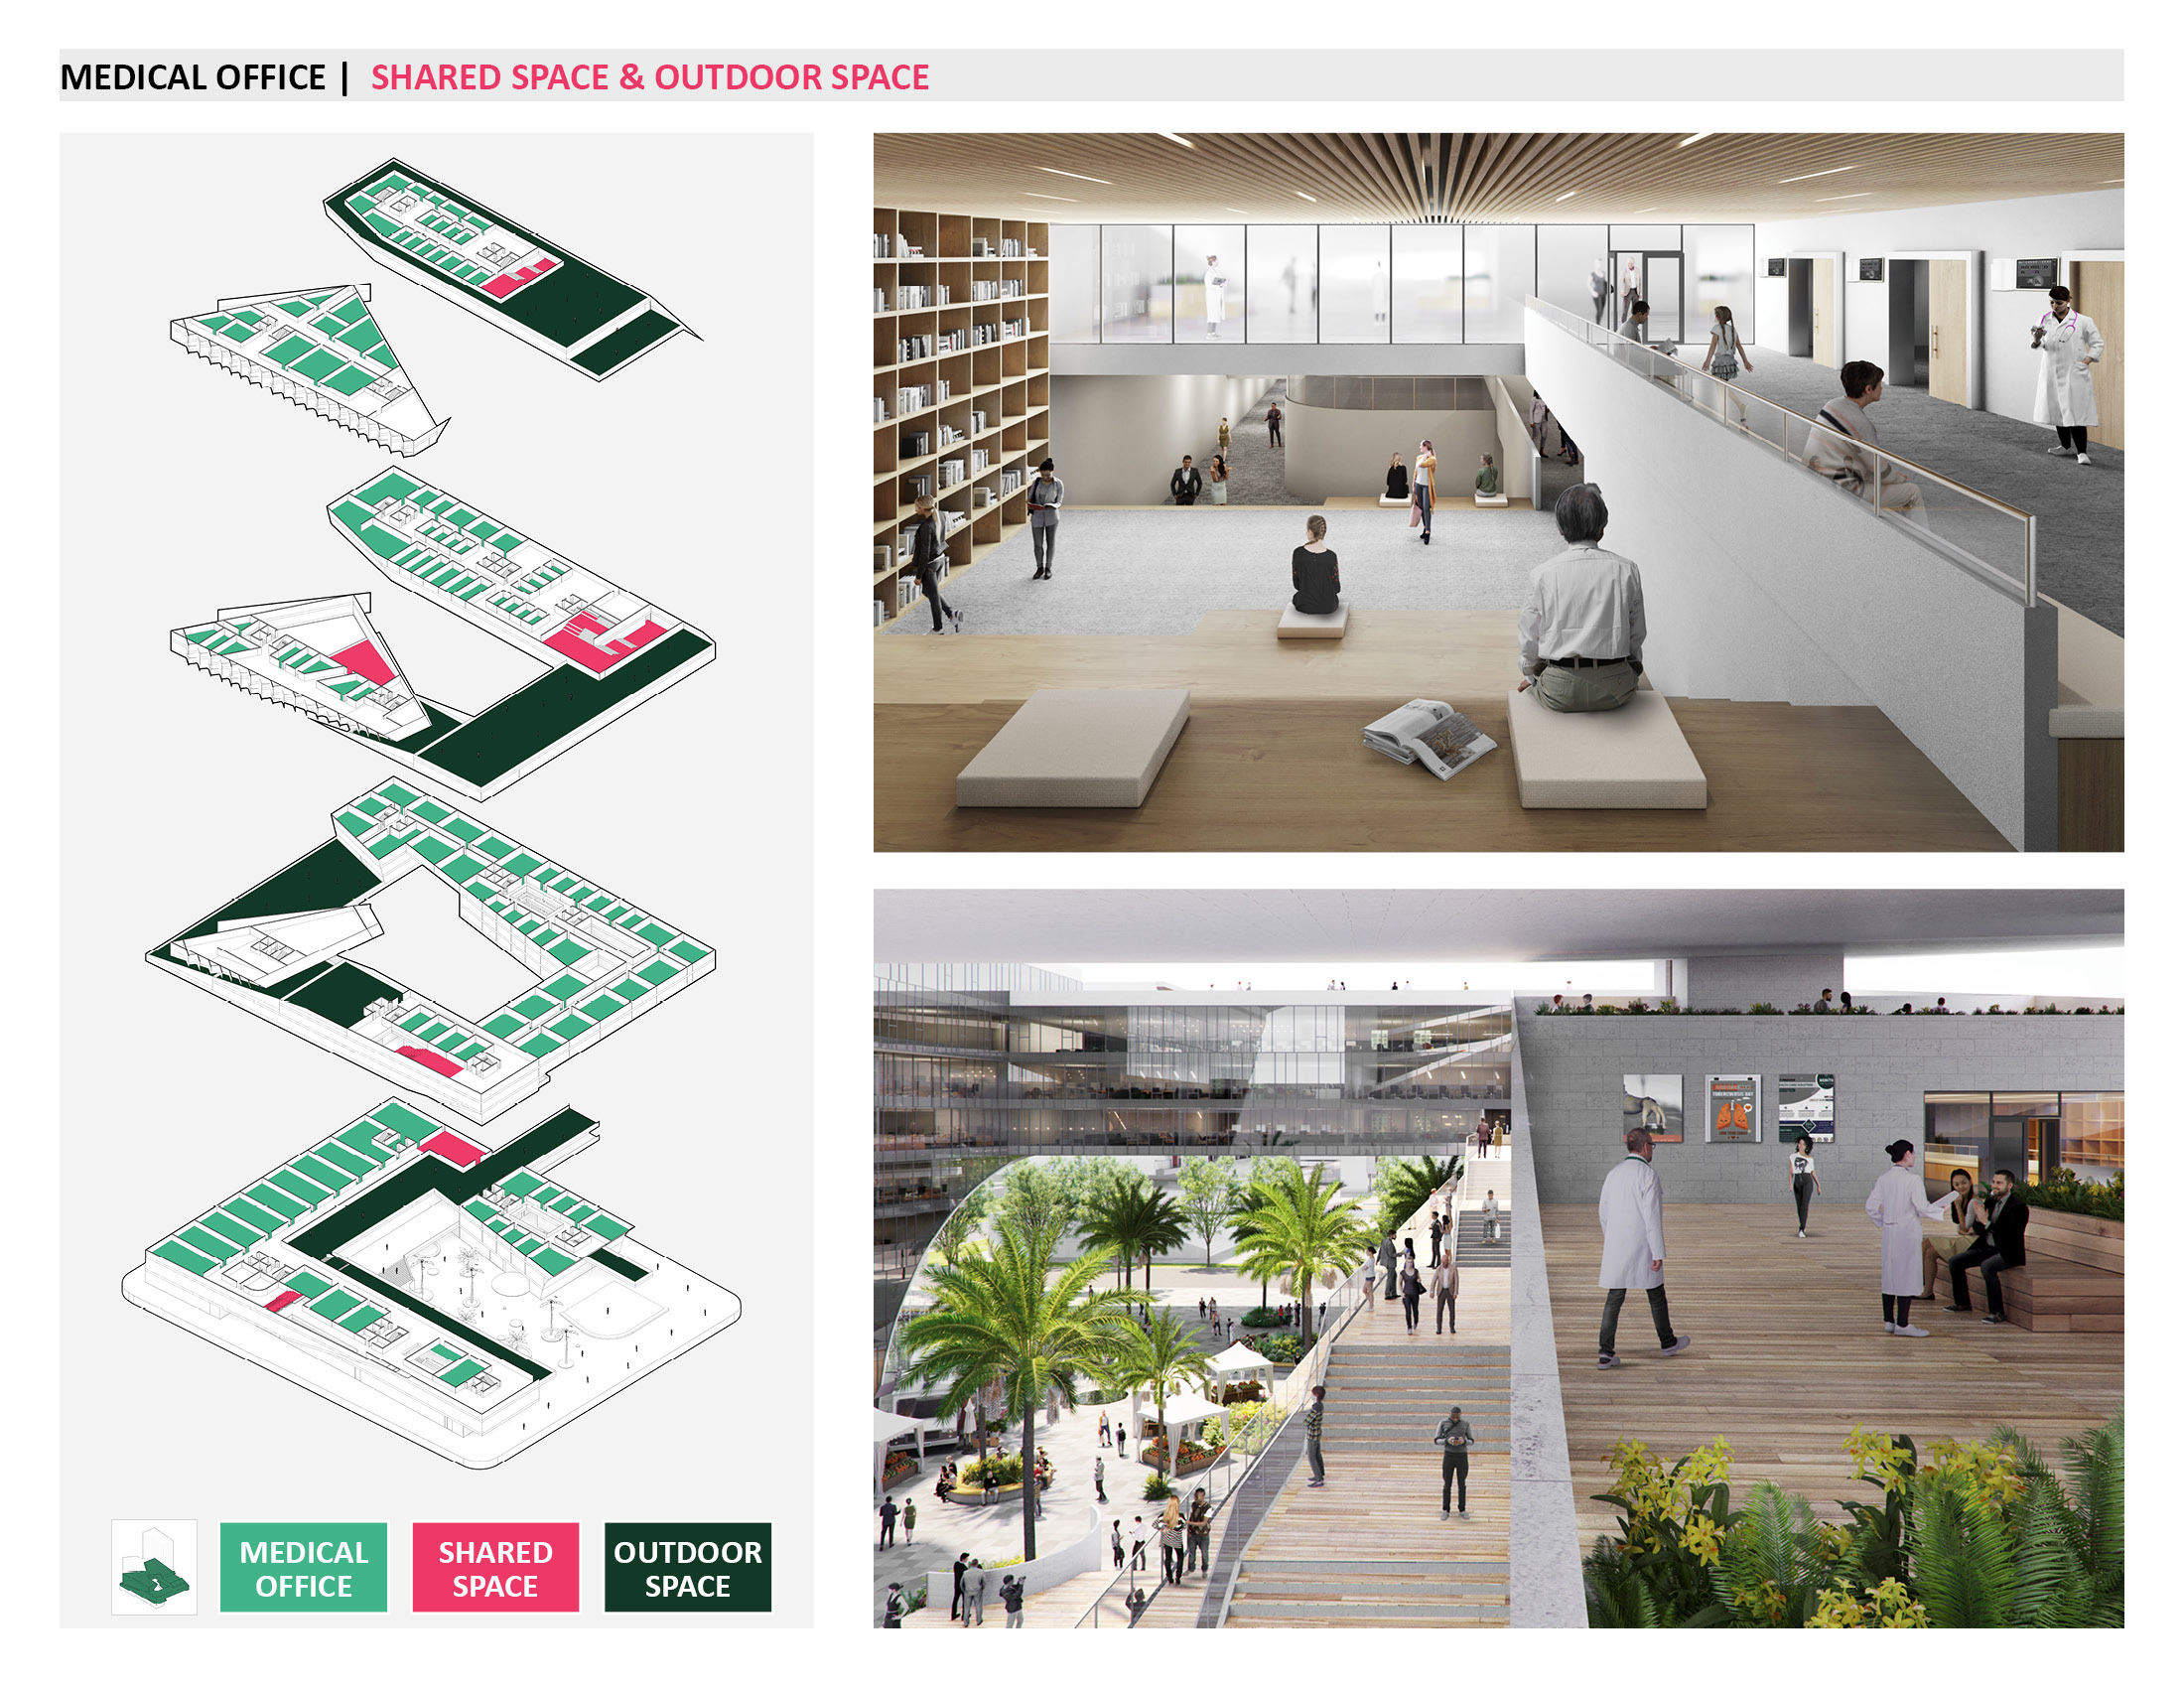 ollage graphic of medical offices; bottom visualization shows the roof plaza and amphitheater space with weathered wood floors, greenery and sitting spaces for doctors and patients; top visualization shows an internal communal space defined by floor to ceiling bookshelves and double height sitting spaces with wood details